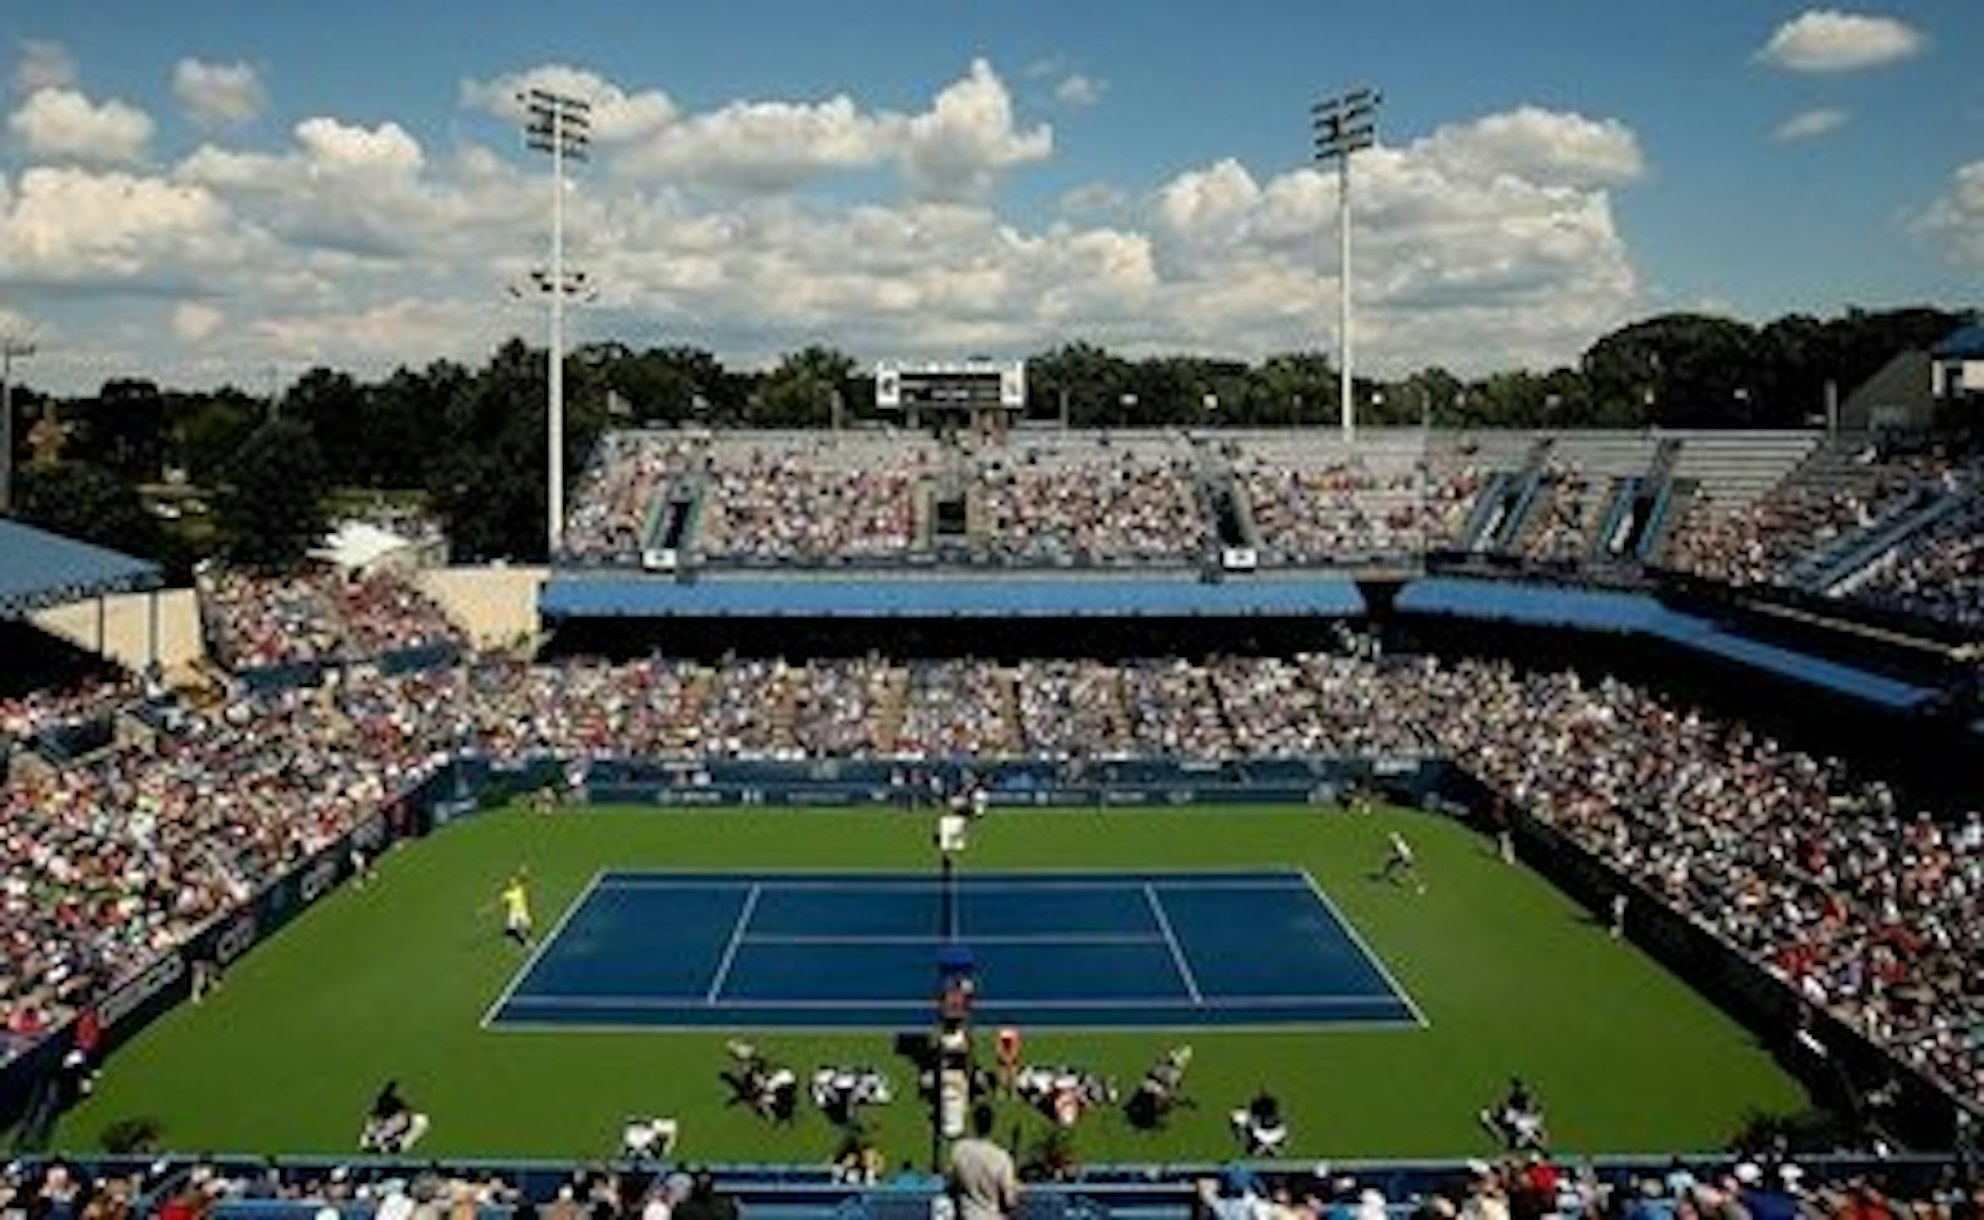 FiftySeven Hours At D.C.'s CITI Open Tennis Tournament www